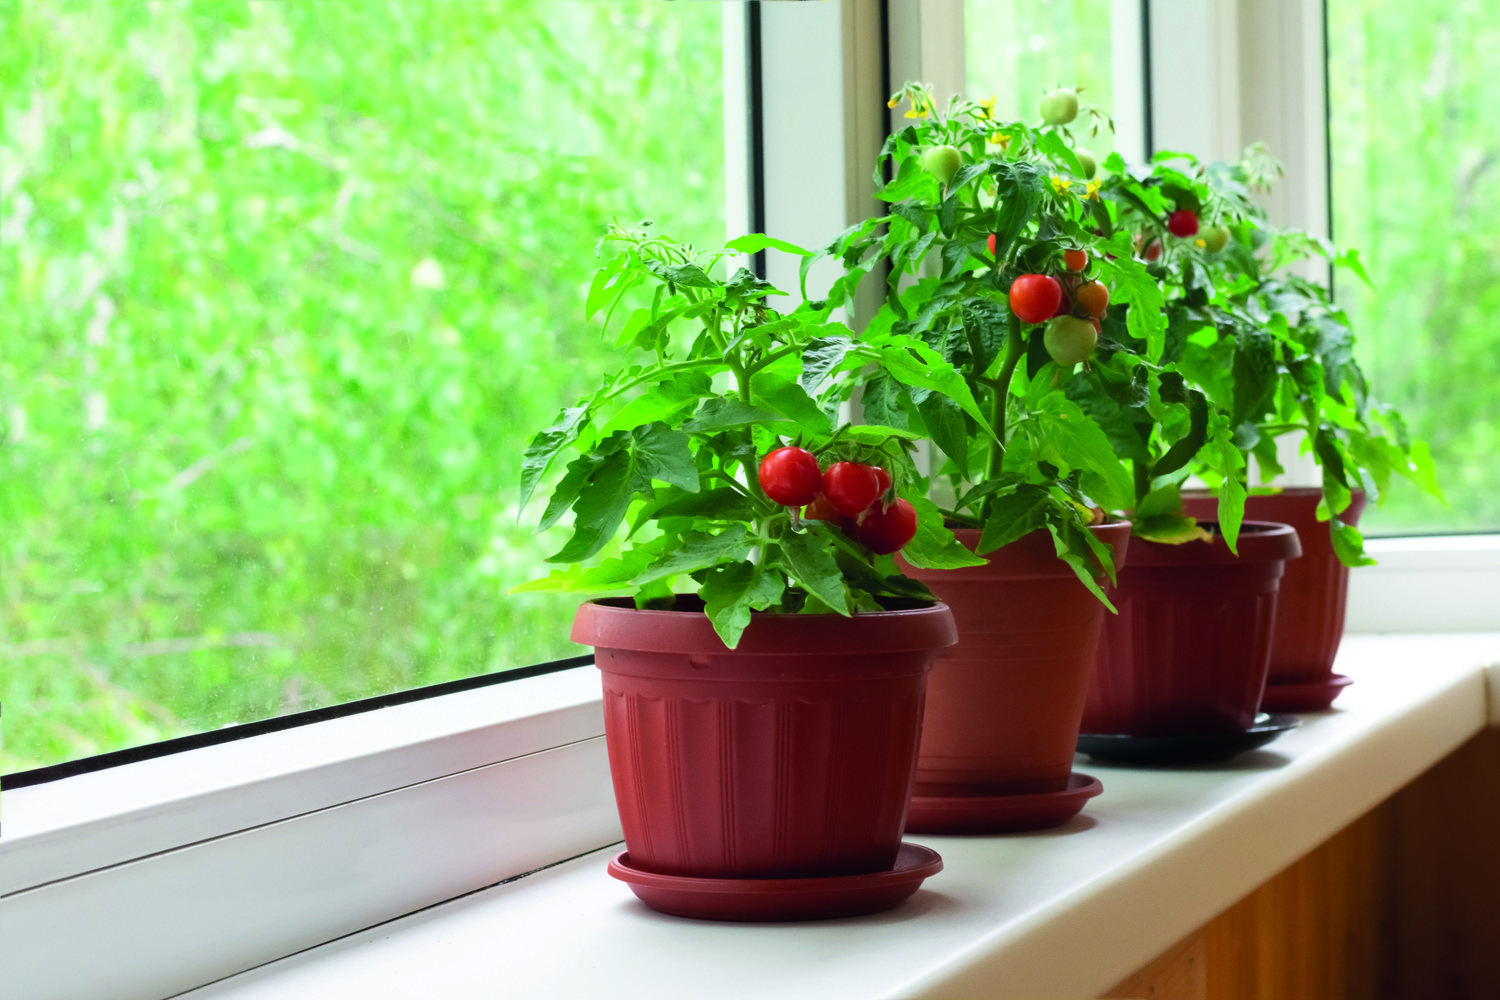 grow your own produce tomato plants